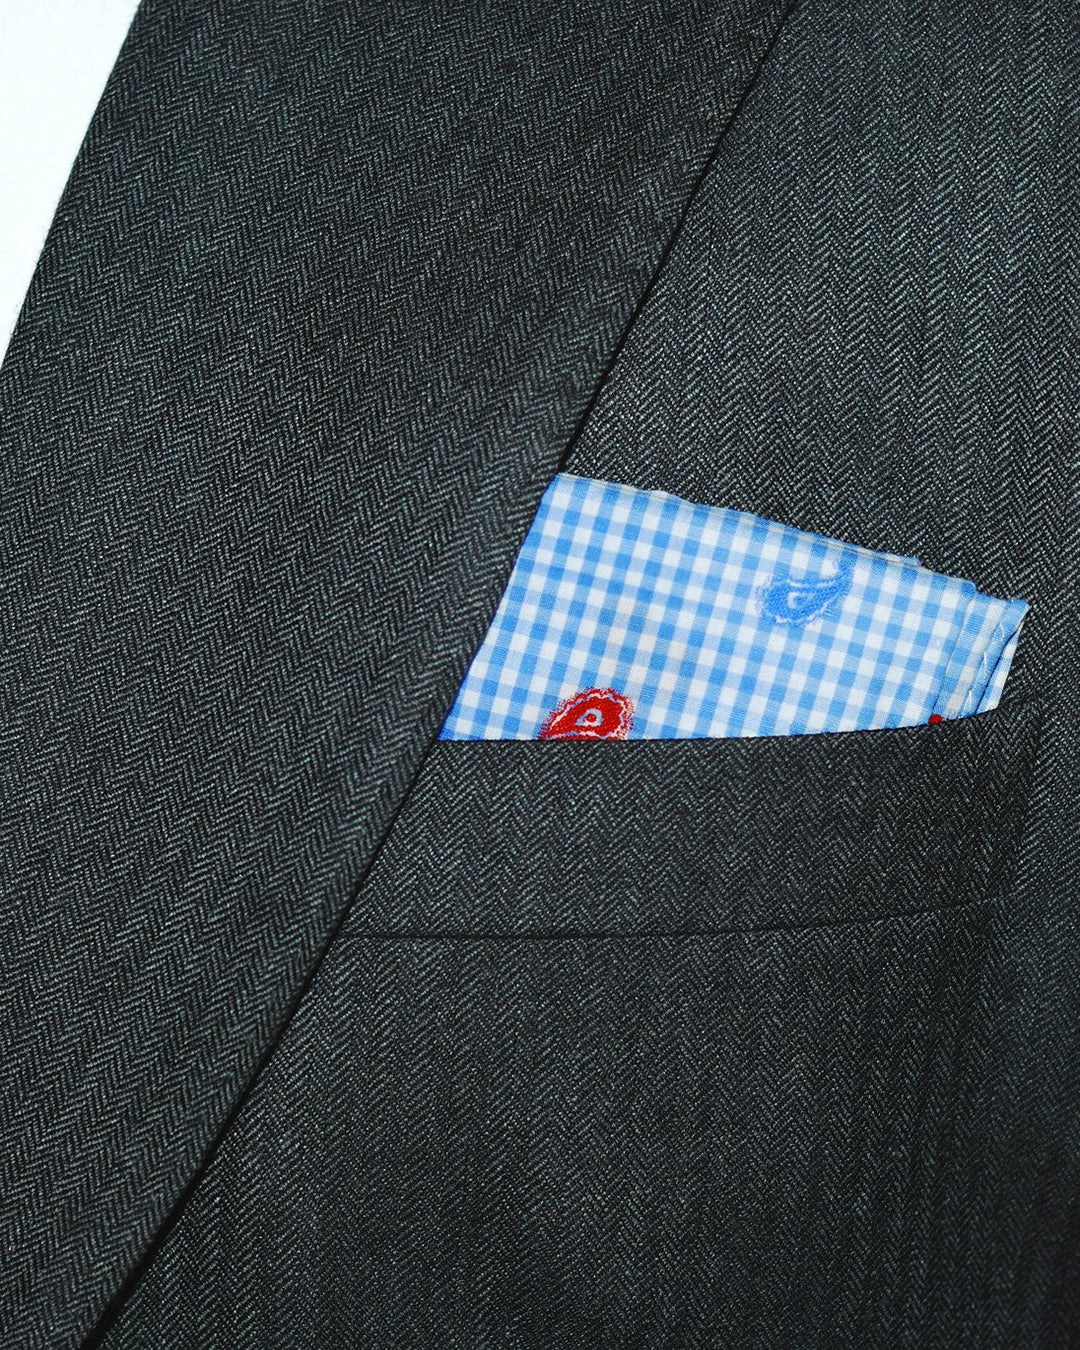 Red Blue Paisley Embroidered Pocket Square